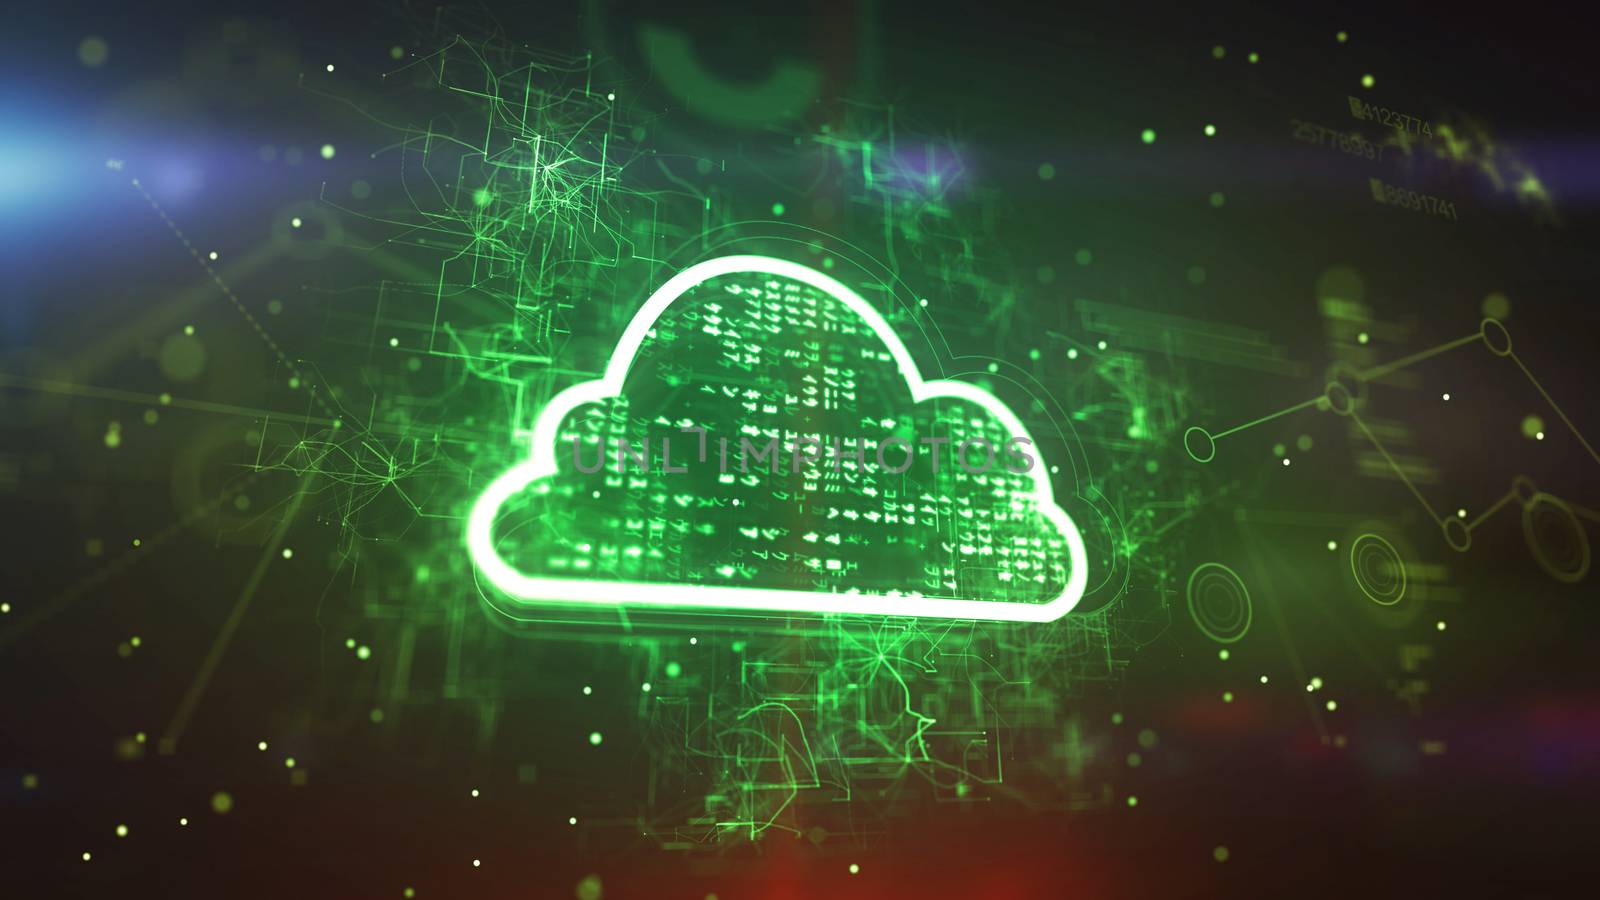 Holographic 3d illustration of a cyberspace cloud cpu with bright pixels in the green background. It consists of a sparkling network of zigzag, twisting and straight lines.